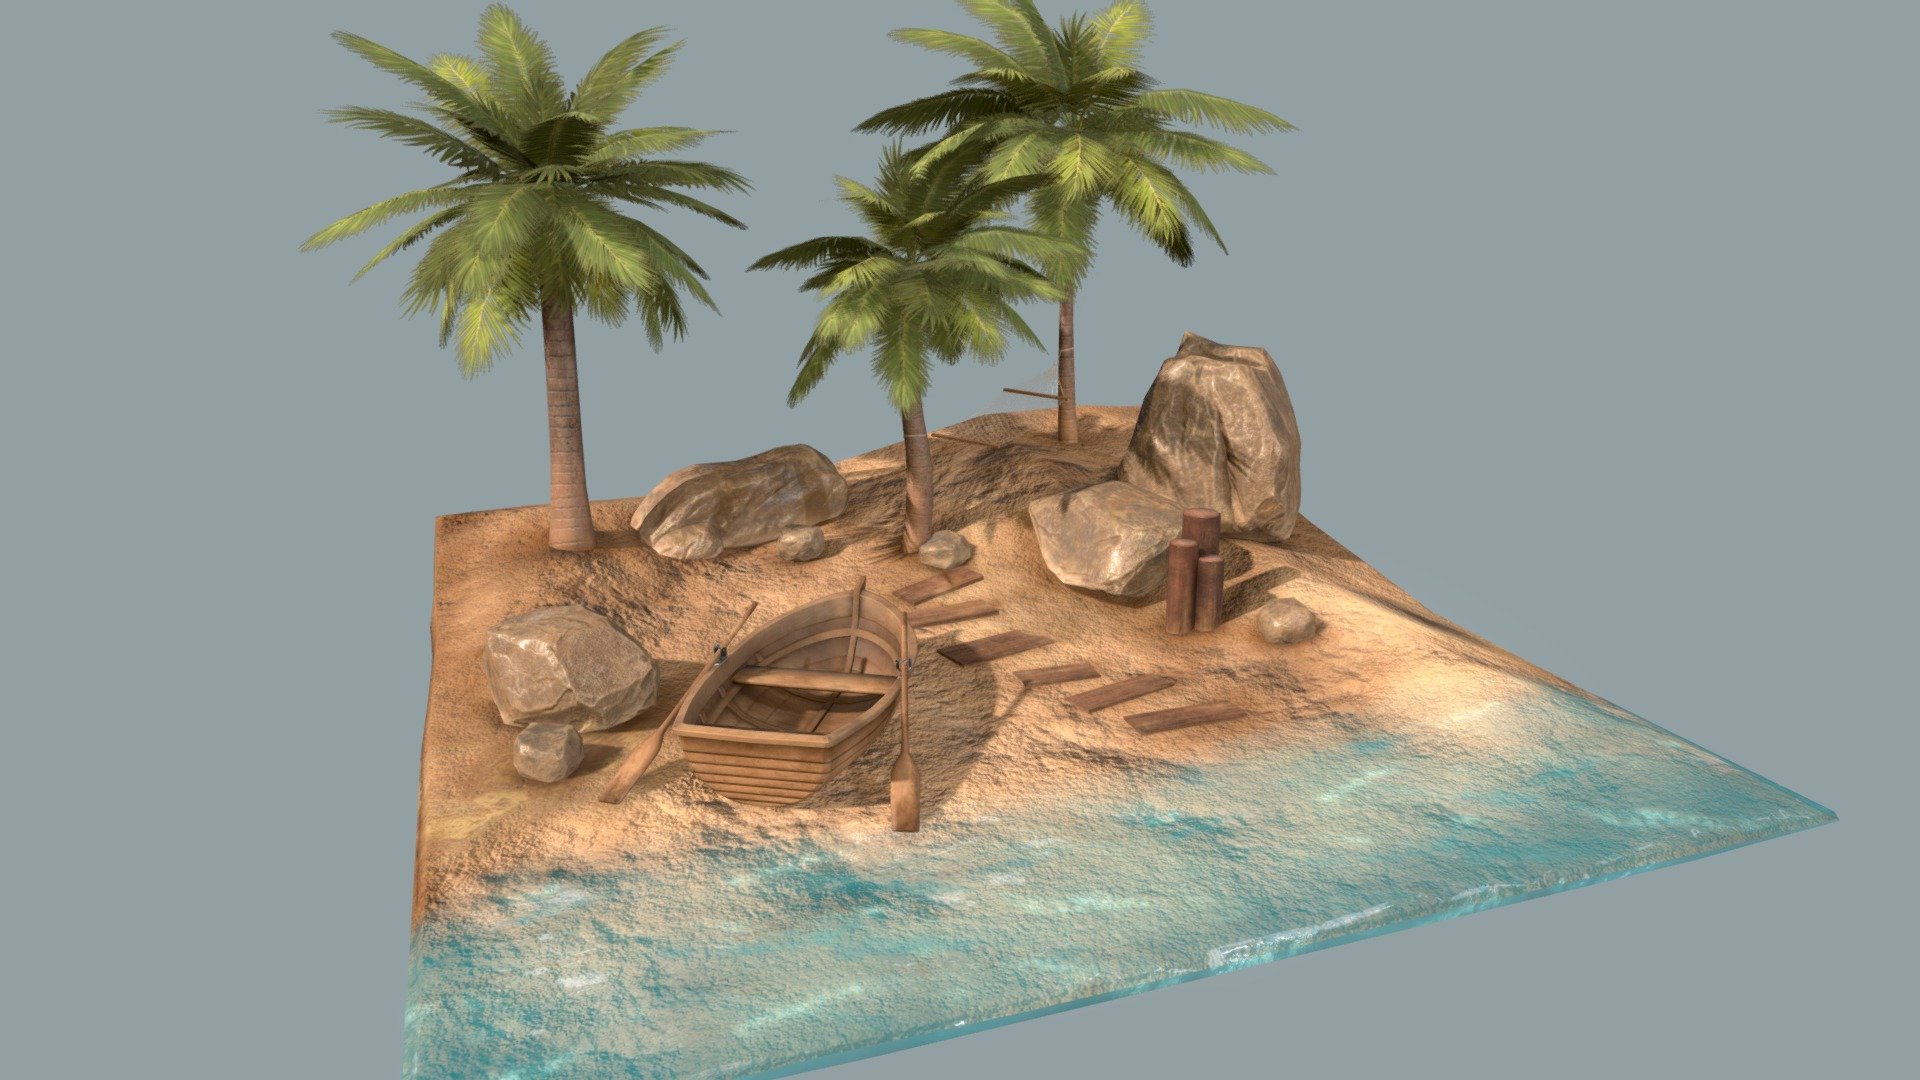 This was my summer project before starting second year at DMU Game Art, although due to some module mix up, I spent about 3 weeks revisiting it on and off. The brief was to make a 10m x 10m realistic-style castaway island, using substance painter to texture. I originally planned to do a pirate-themed island and made extra props, but realised that they just didn't work at all with the scene. Instead I've kept it very basic and natural. I don't think it's super realistic at all and if I had more time I would probably have devoted more of it to better texturing, but I think for a last-minute project it's not too bad ^^ - Beach Diorama - 3D model by Jodie Bavister (@jodiebavister) 3d model